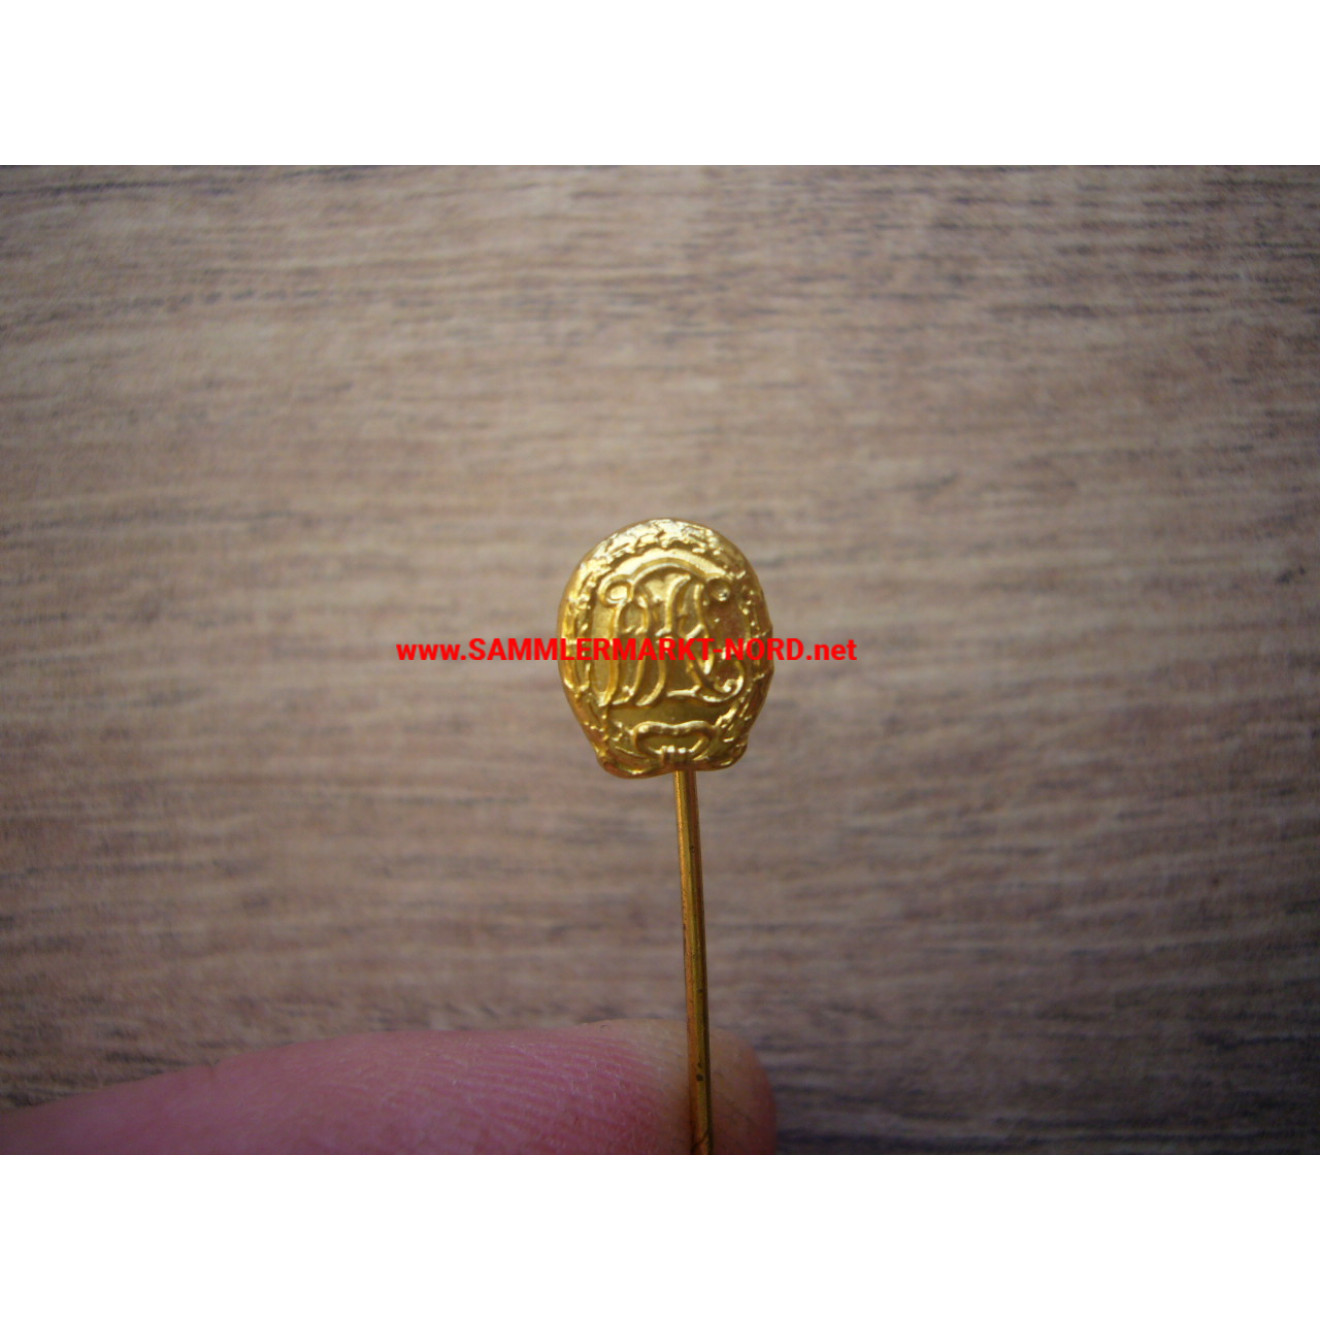 DRL sports badge in gold - version 1957 - 9 mm miniature